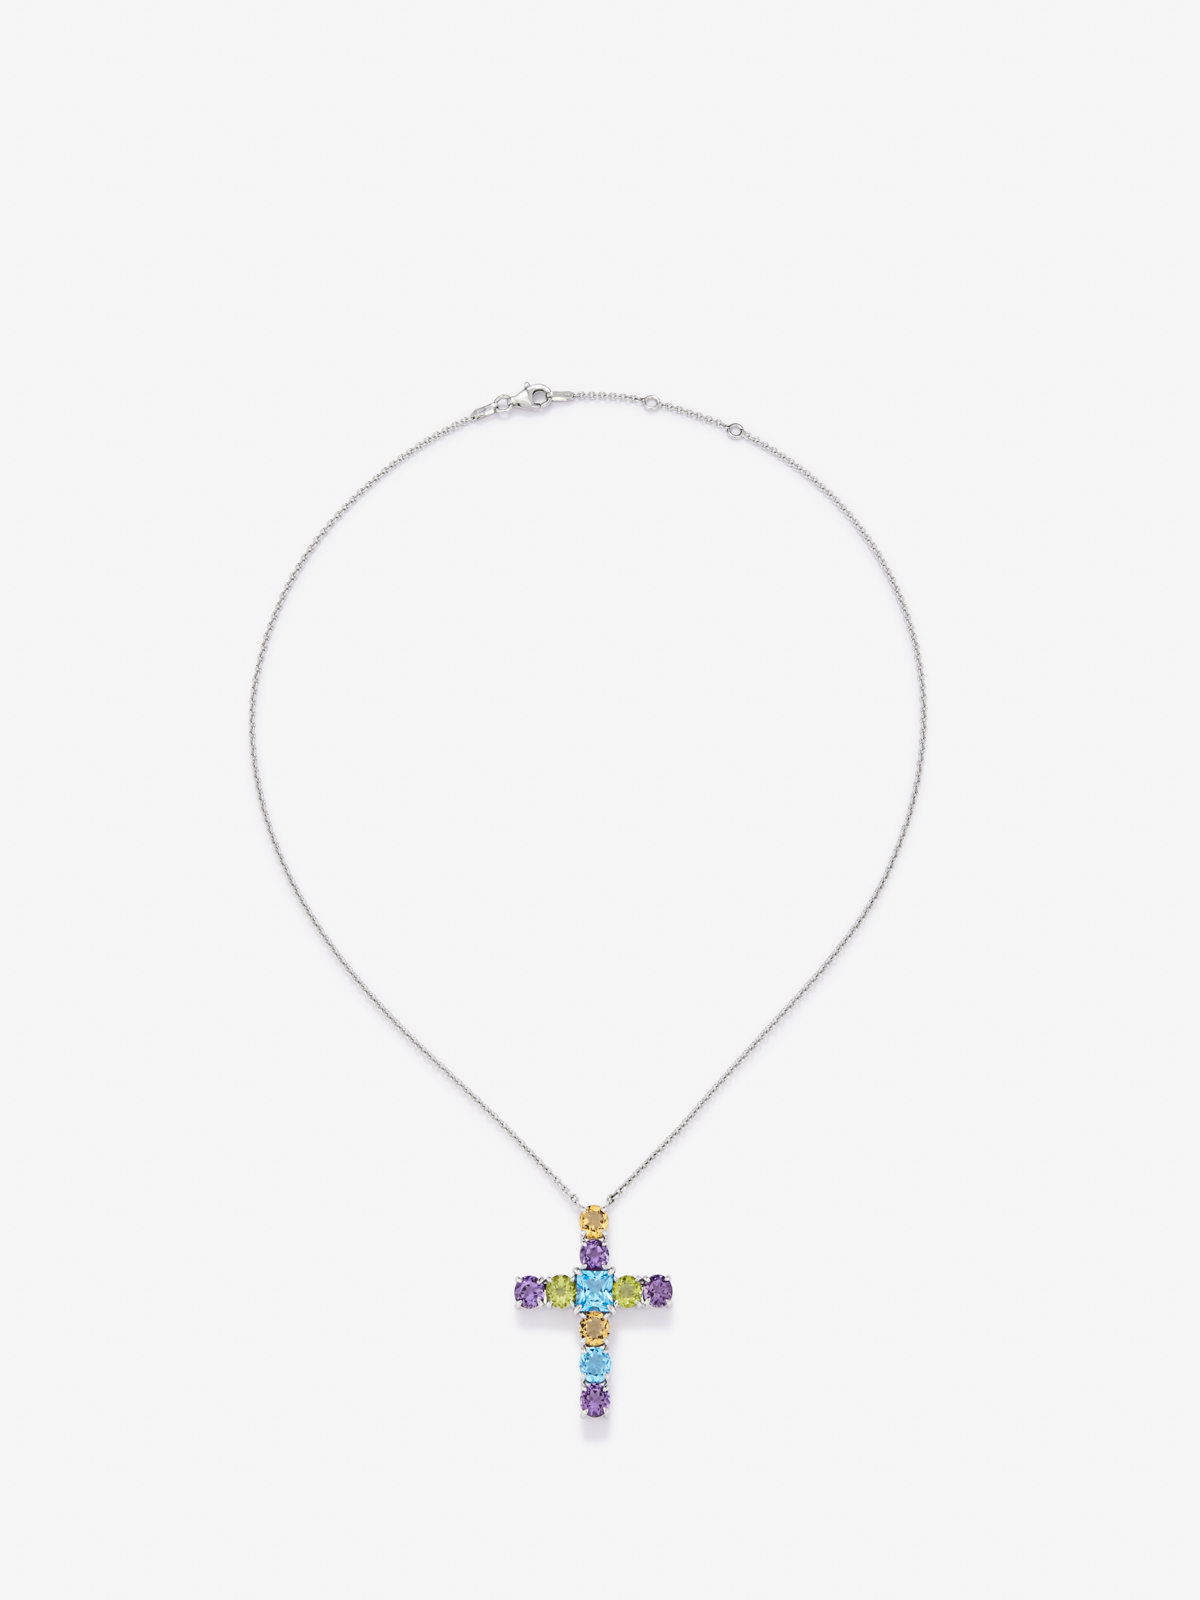 Pendant chain with 925 silver cross adorned with multicolored gems